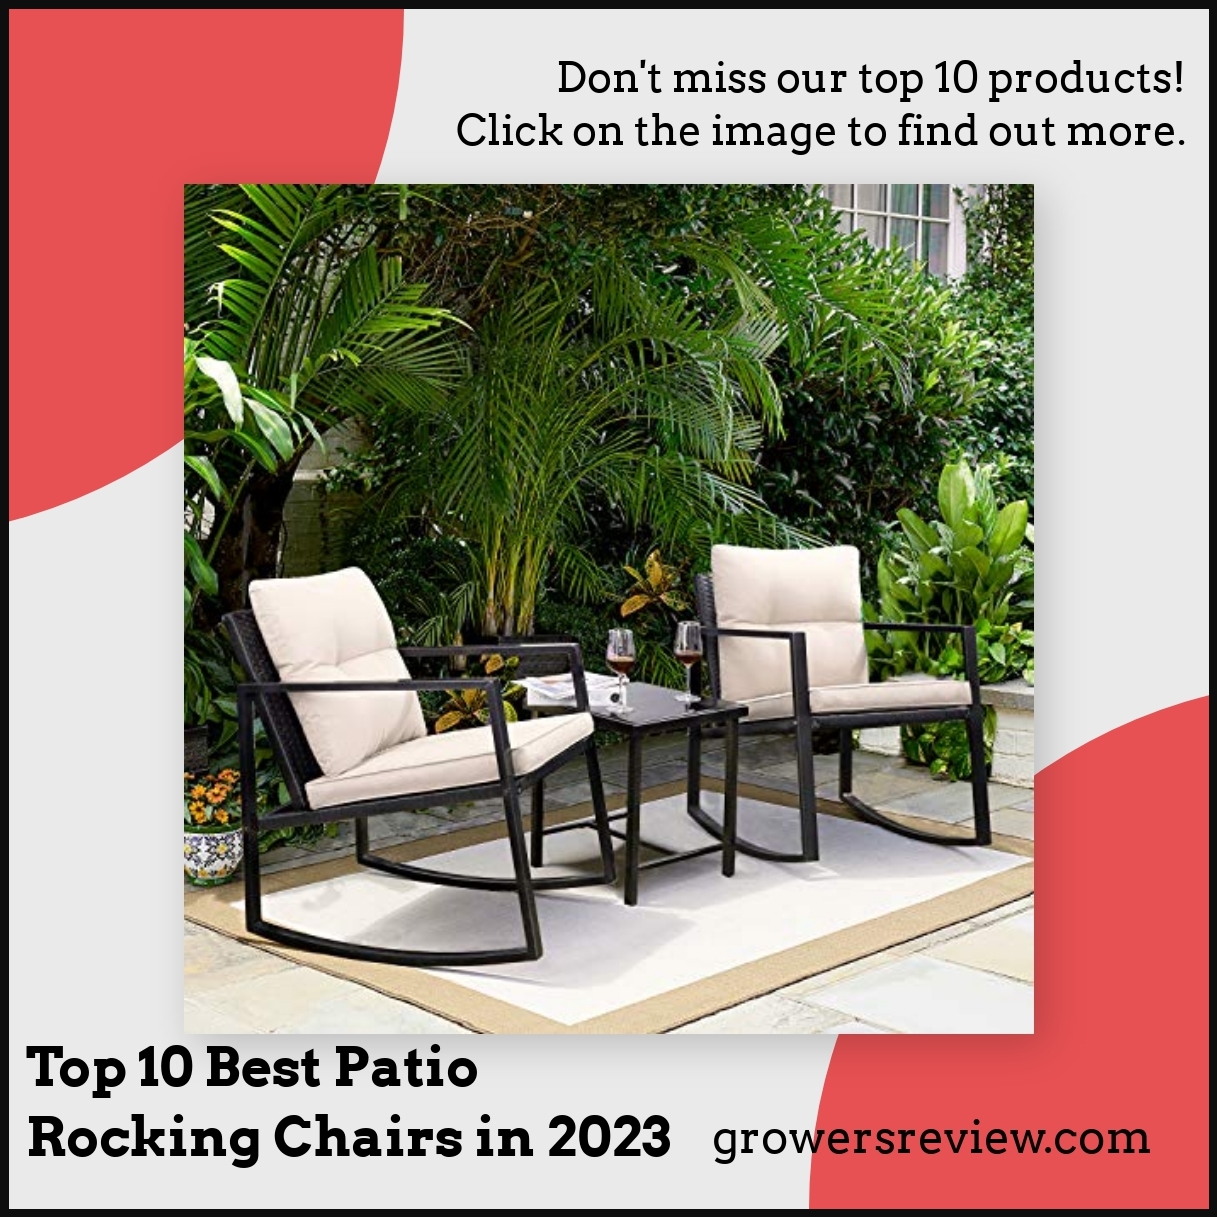 Top 10 Best Patio Rocking Chairs in 2023